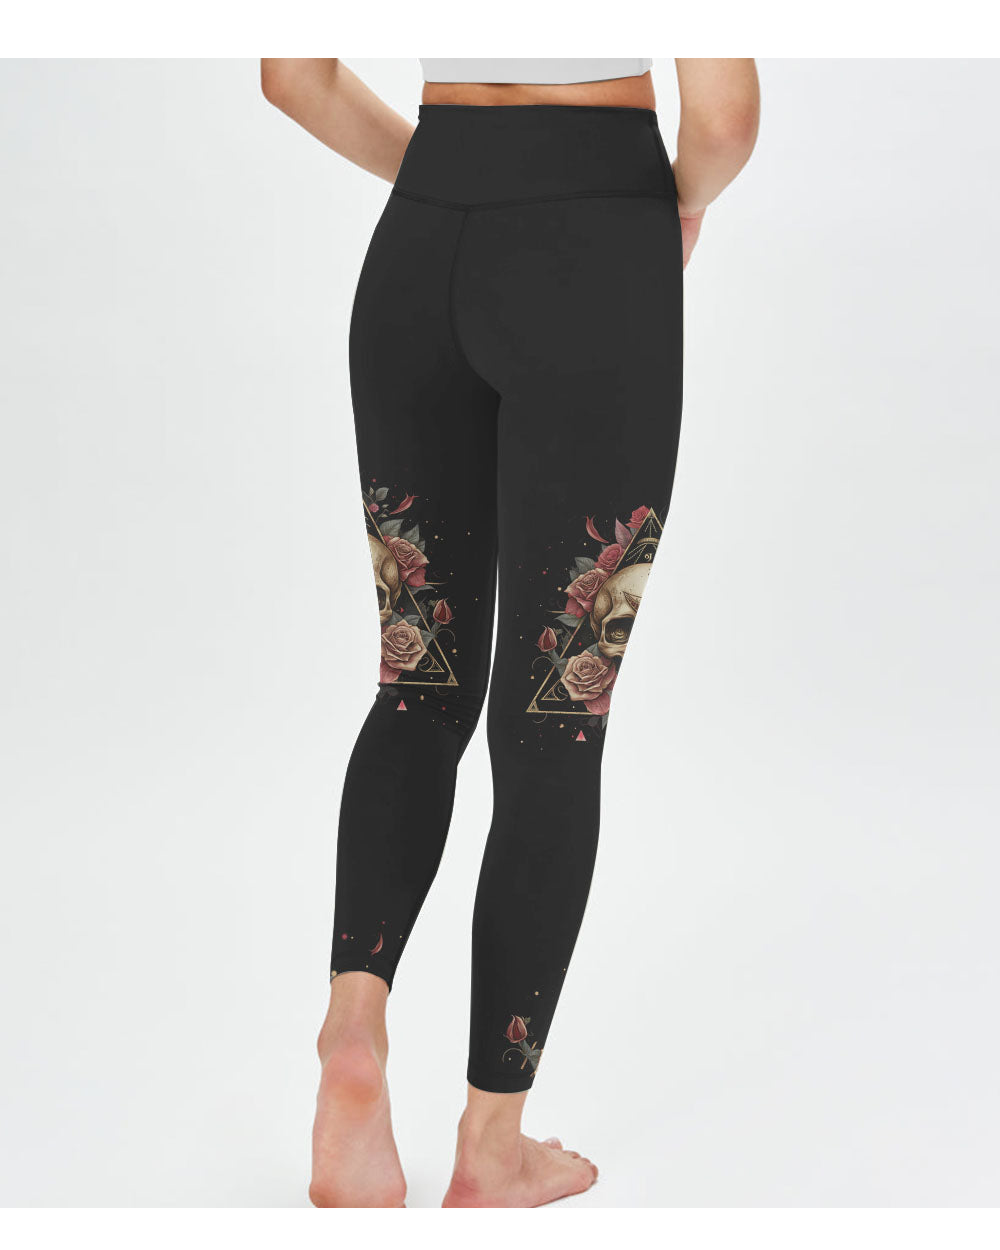 You Couldn't Handle Me Skull Roses Triangle Leggings